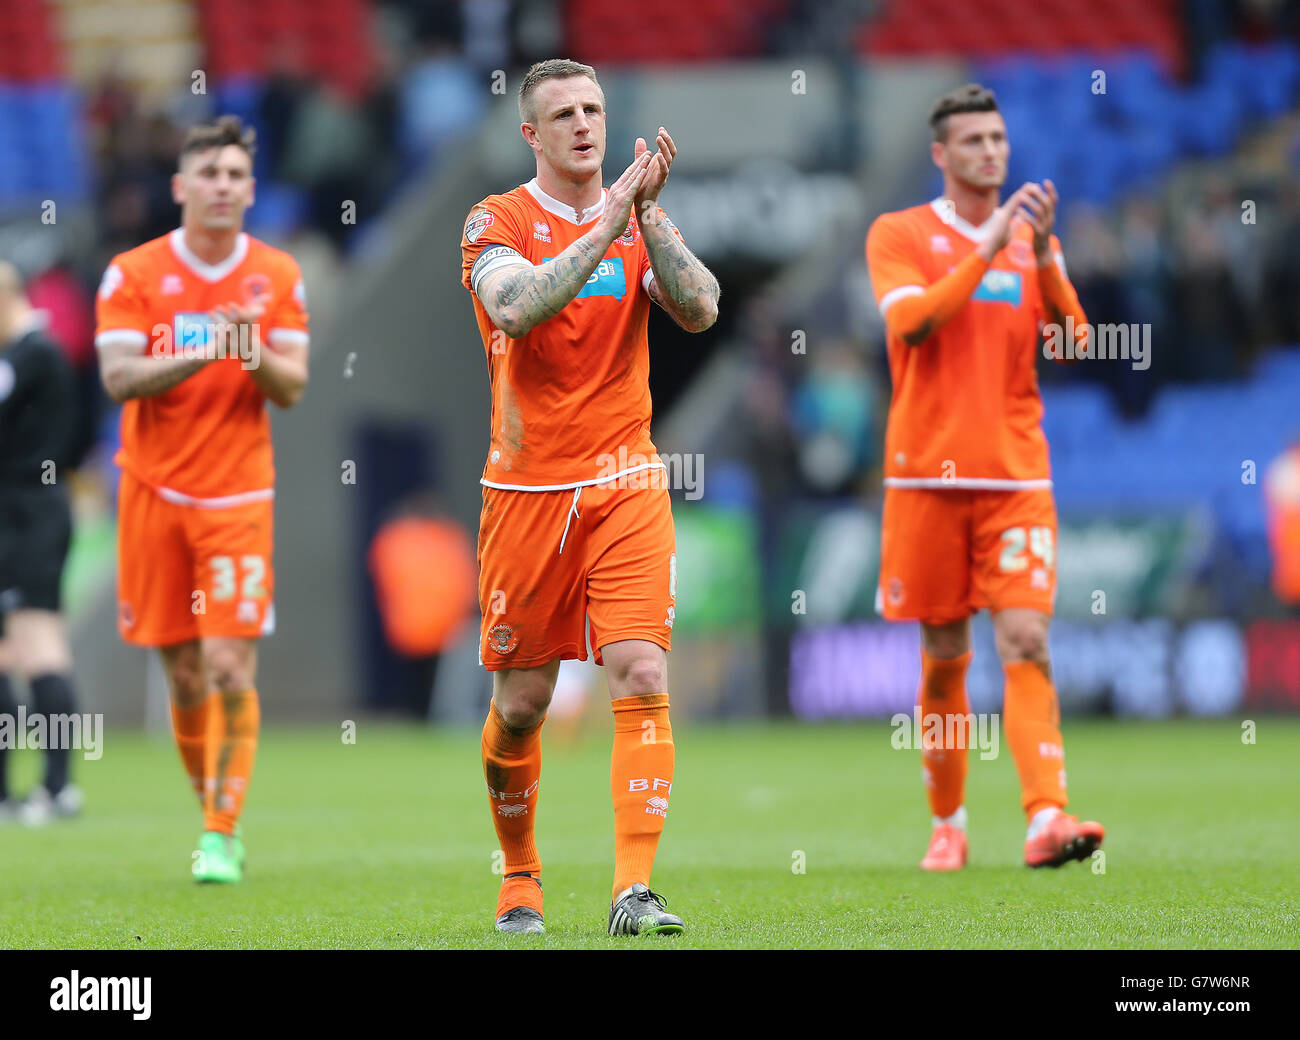 Soccer - Sky Bet Championship - Bolton Wanderers v Blackpool - Macron Stadium. Blackpool's captain Peter Clarke applauds the fans at the end of the game against Bolton Wanderers Stock Photo